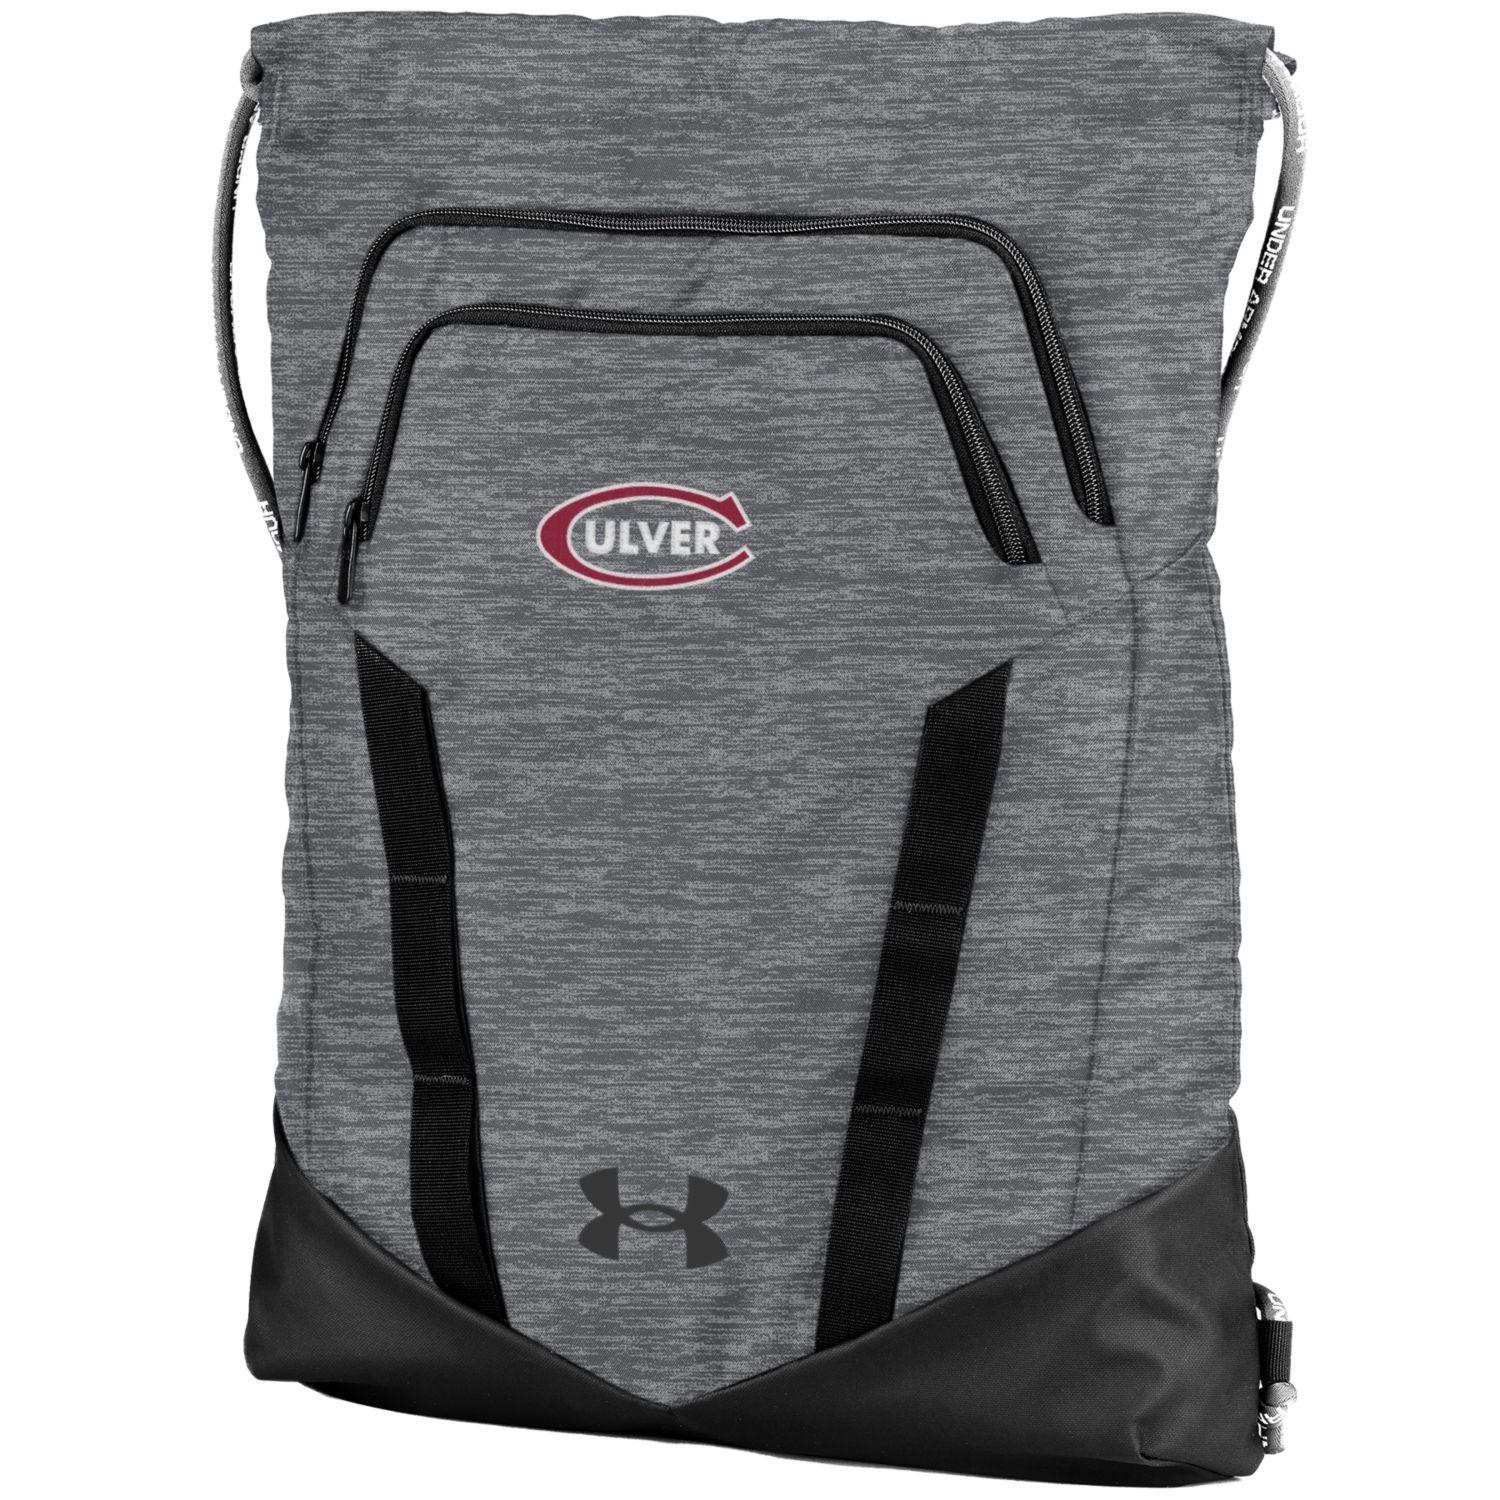 Under Armour Undeniable Sackpack - Pitch Grey